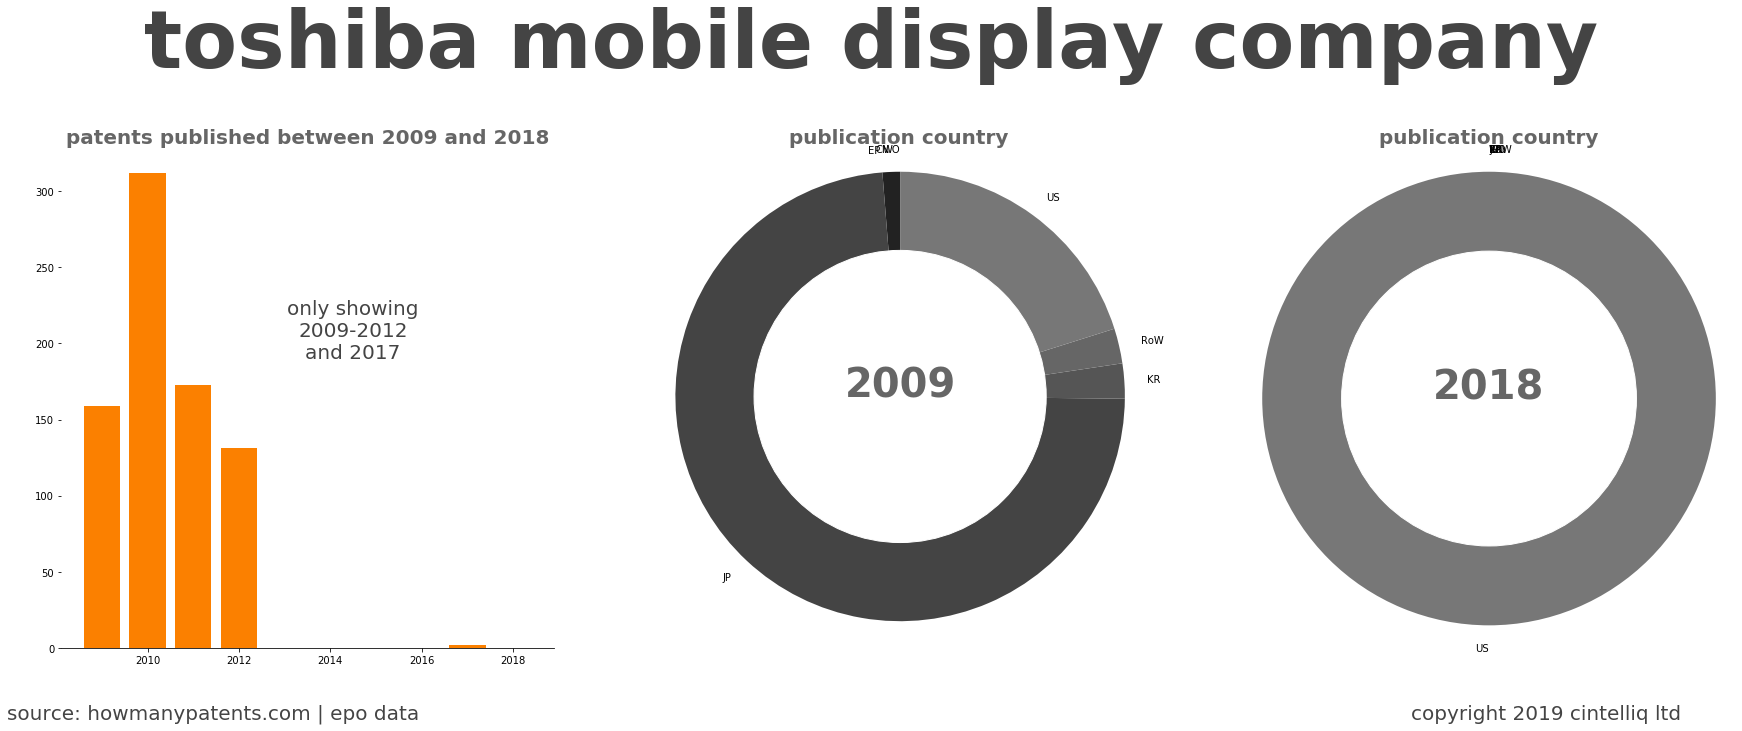 summary of patents for Toshiba Mobile Display Company